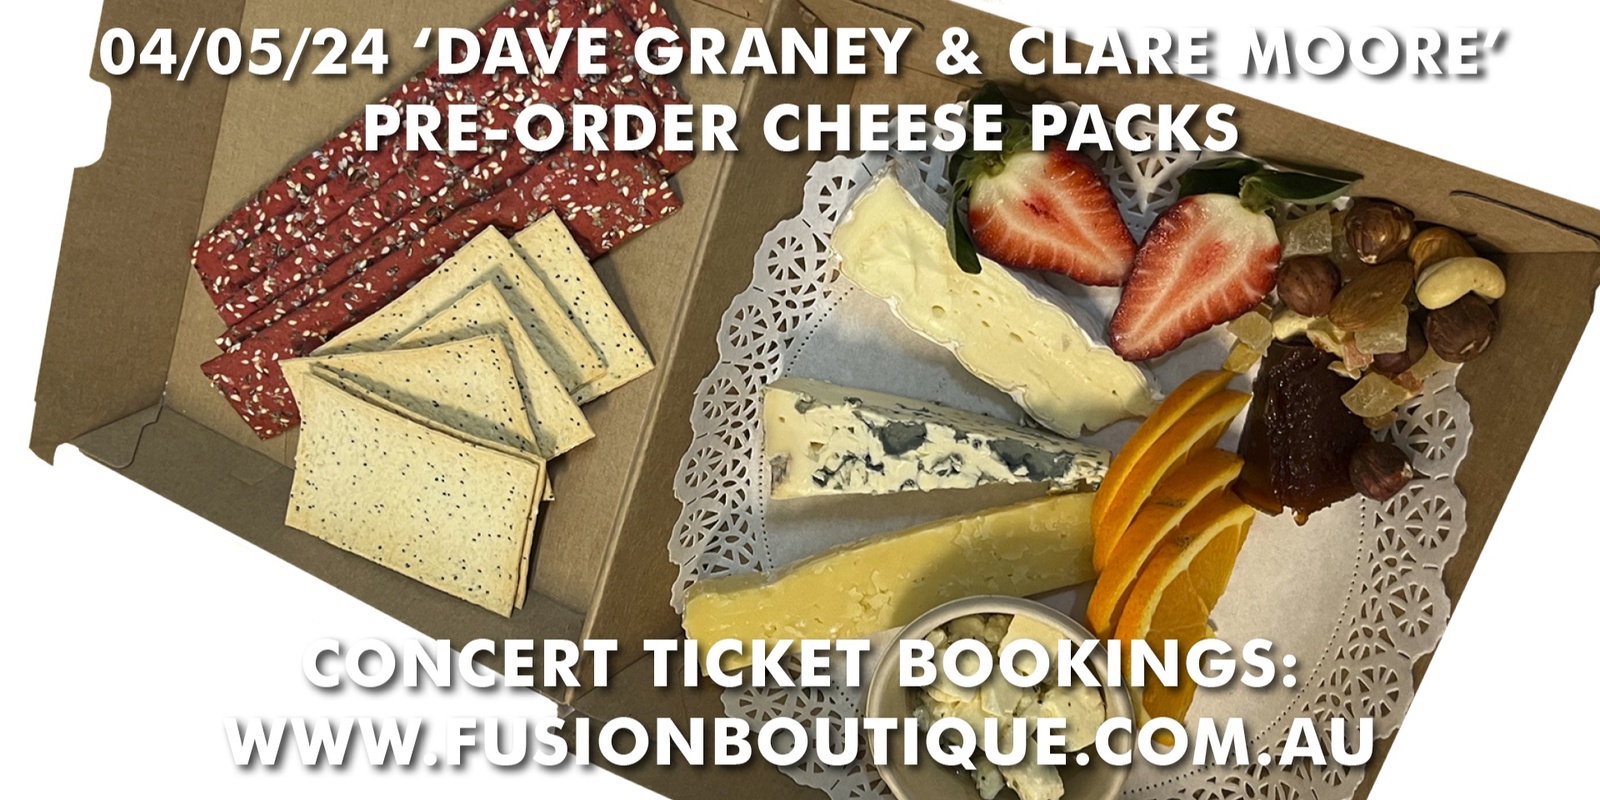 Banner image for BAROQUE pre-order CHEESE PACK for the "Dave Graney & Clare Moore" concert